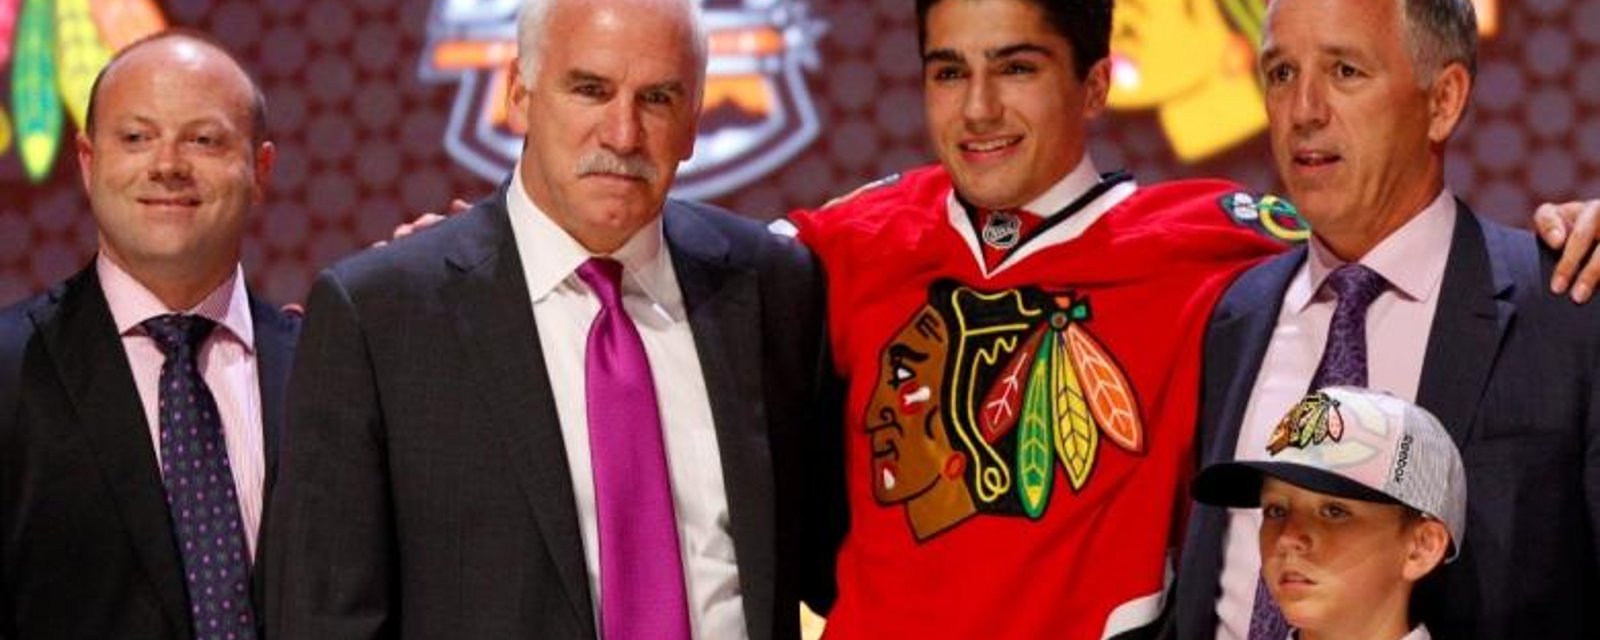 The Blackhawks have signed one of their top prospects.